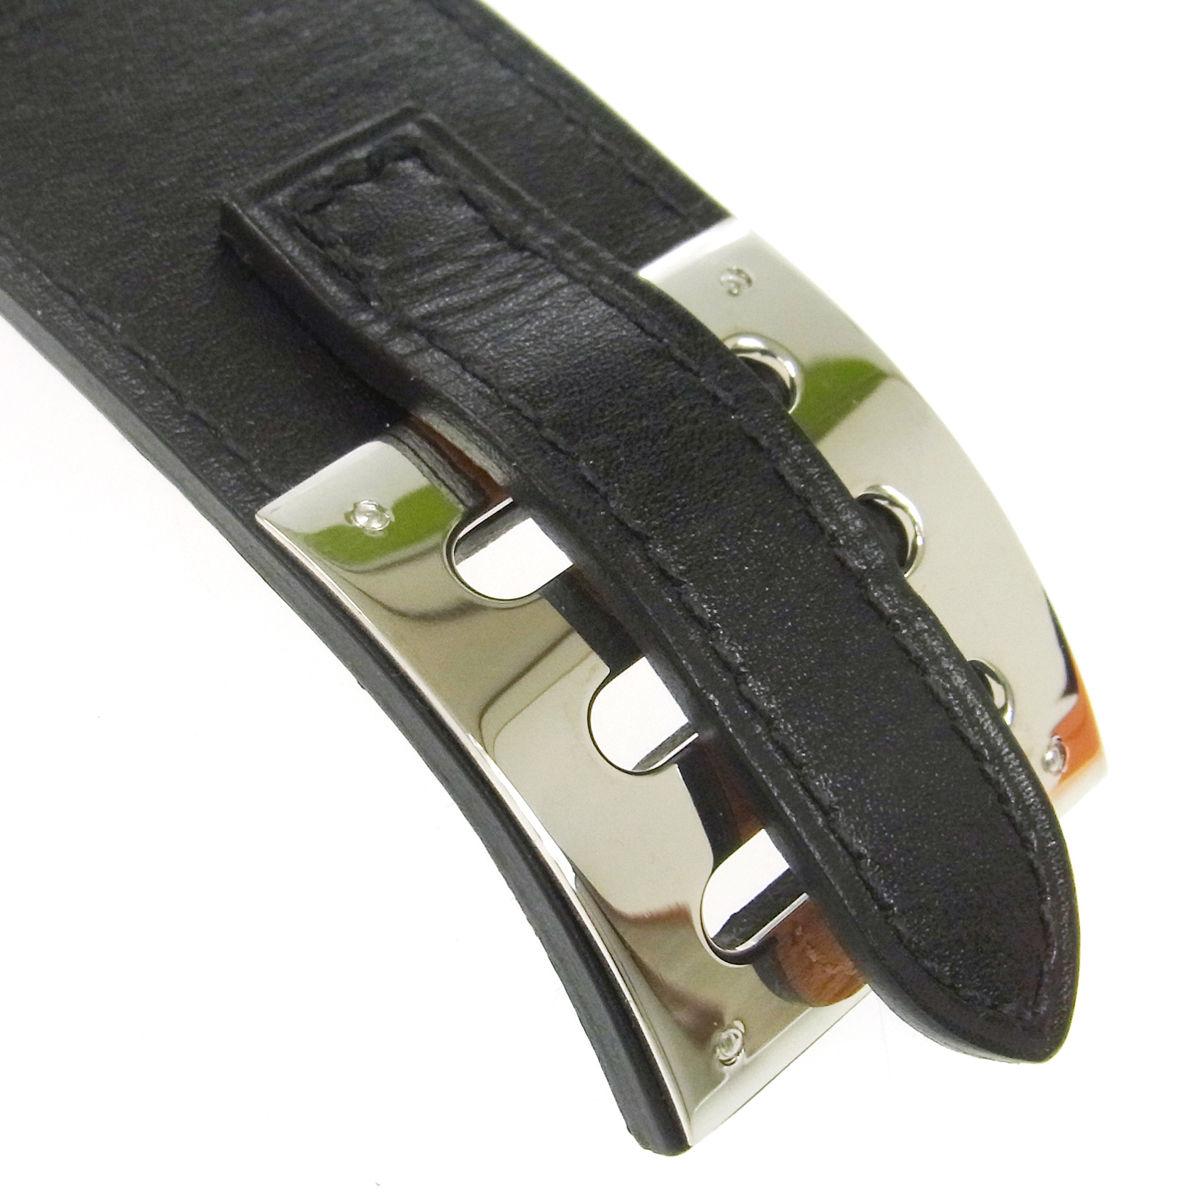 Hermes Black Leather Silver Wide Men's Women's Buckle Cuff Bracelet in Box

Leather
Silver tone hardware
Buckle closure
Date code present
Made in France
Width 1.5